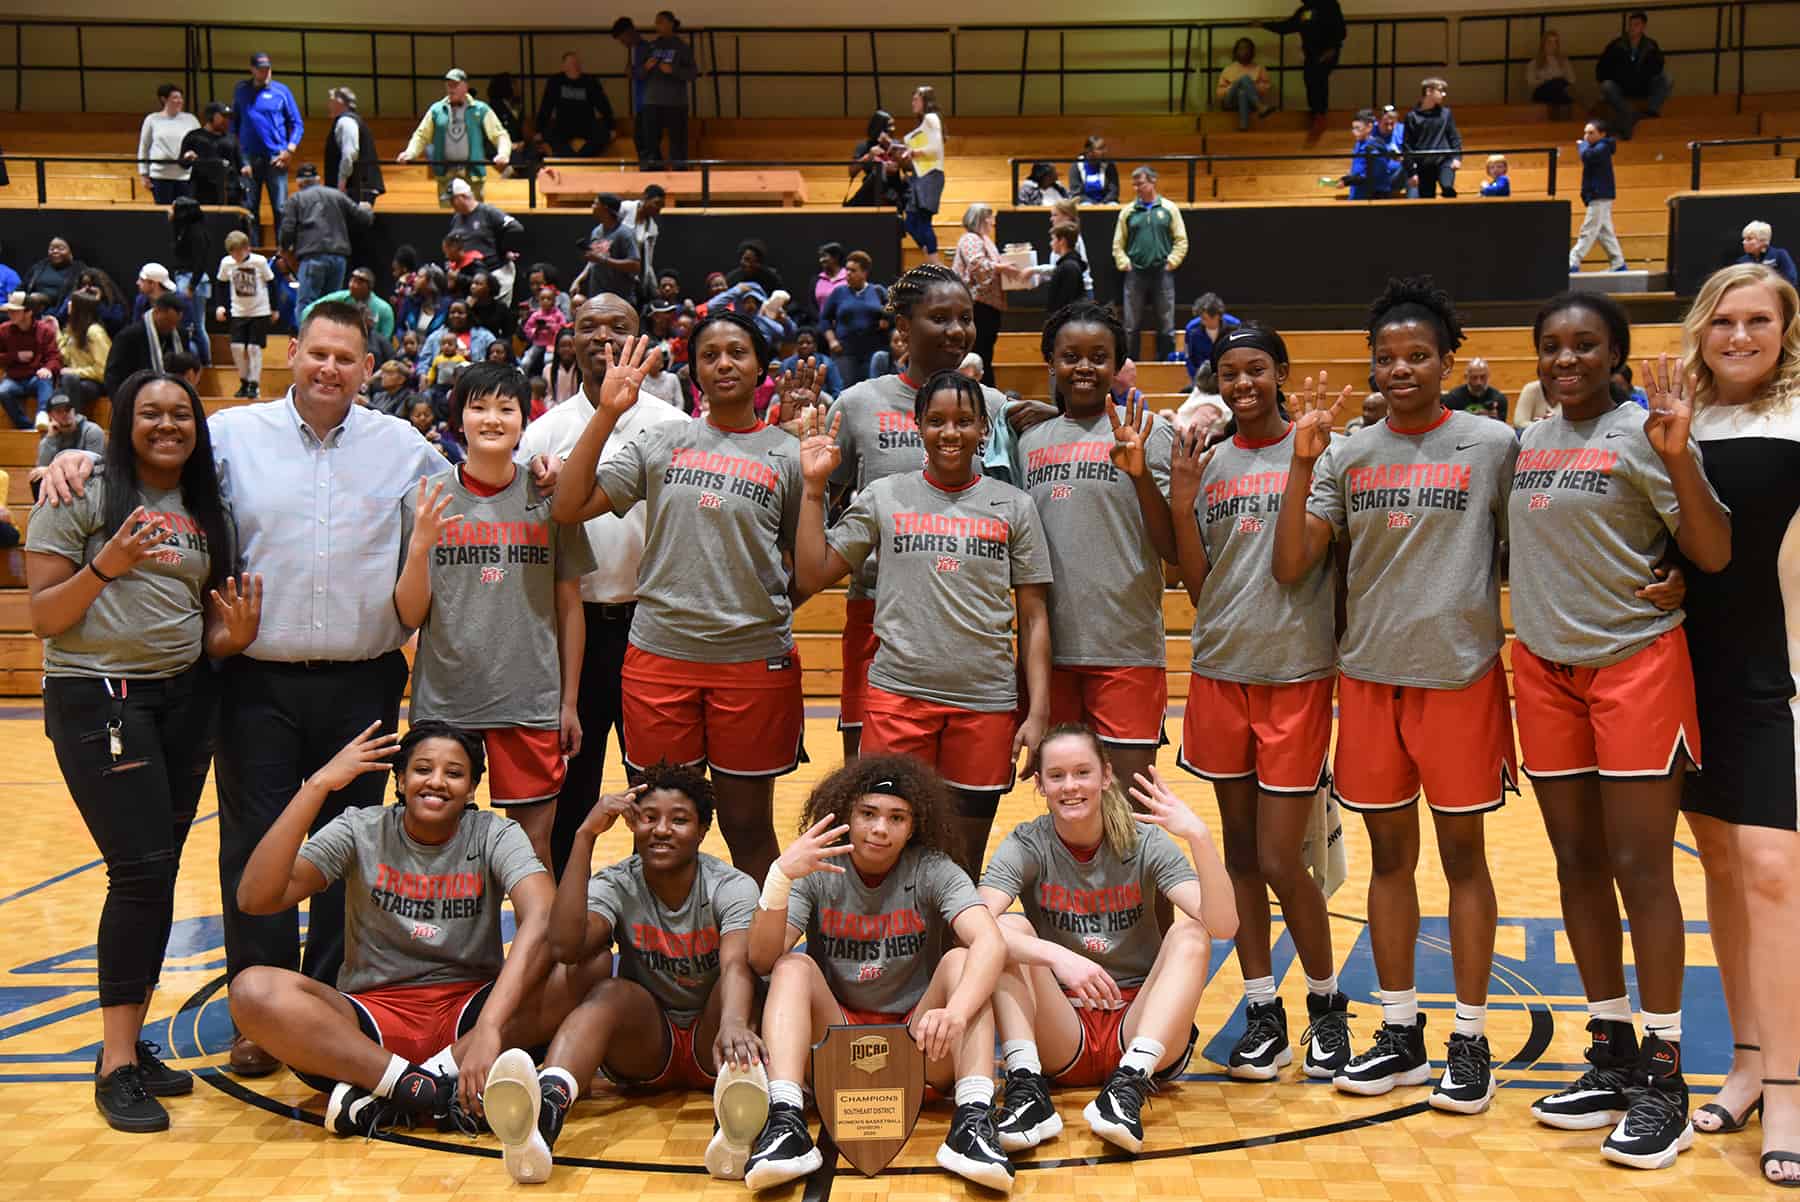 South Georgia Technical College’s Lady Jets are shown above after winning the NJCAA District J tournament in South Carolina and clinching the opportunity to go to the NJCAA National Tournament for their fourth consecutive year. Unfortunately, the tournament was cancelled and now the 2020-2021 season has been moved back to a January 2021 start and limited to 22 games.